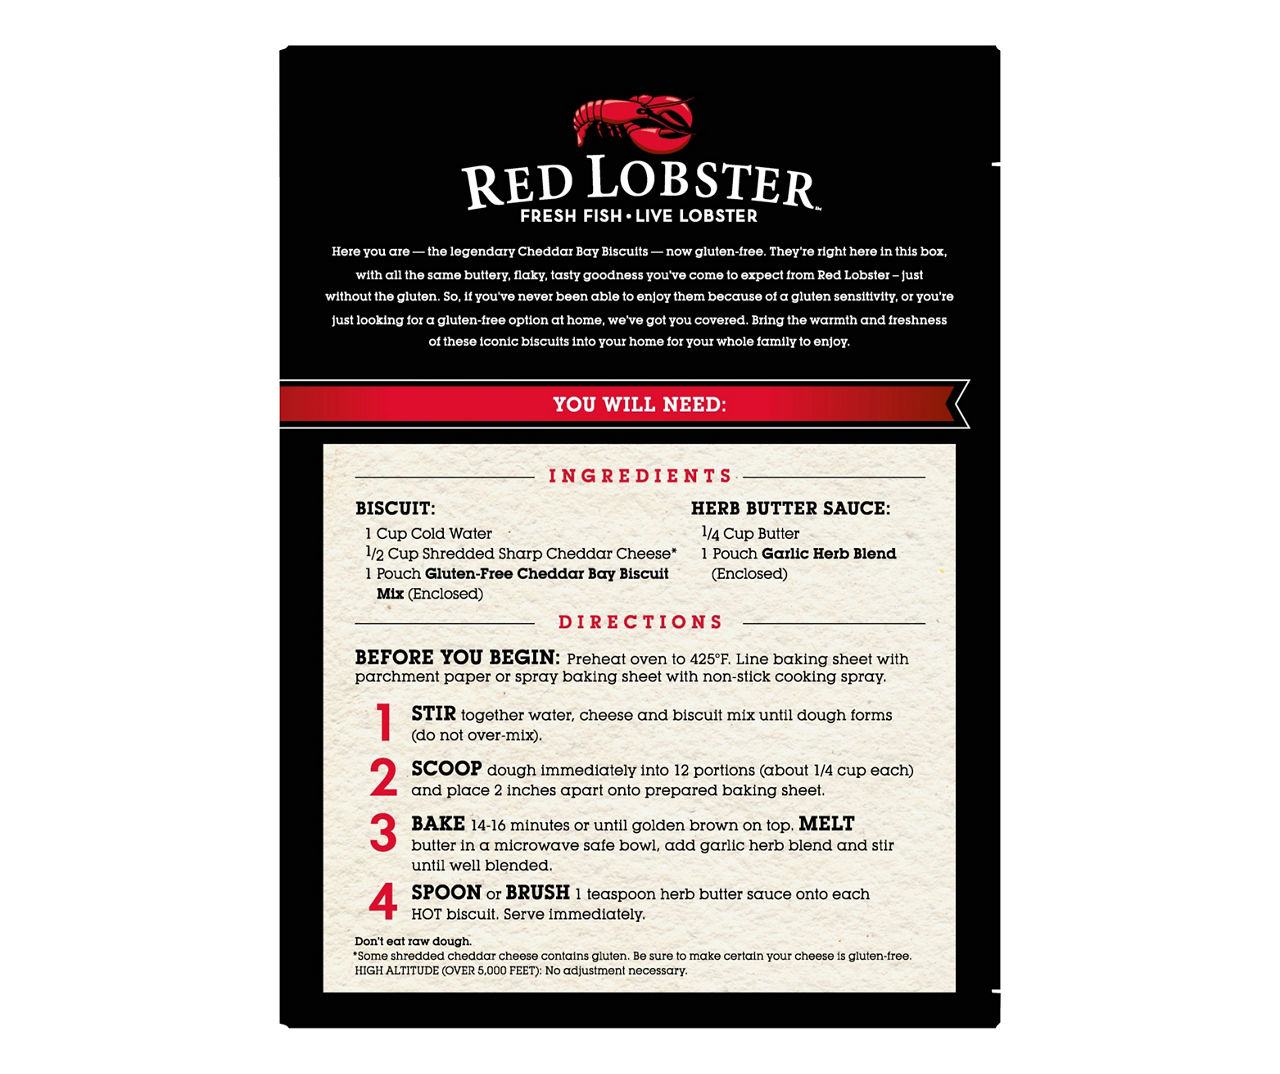 Red Lobster Cheddar Bay Biscuits Mix, Gluten-Free, 11.36-Ounce Boxes (Pack  of 8)